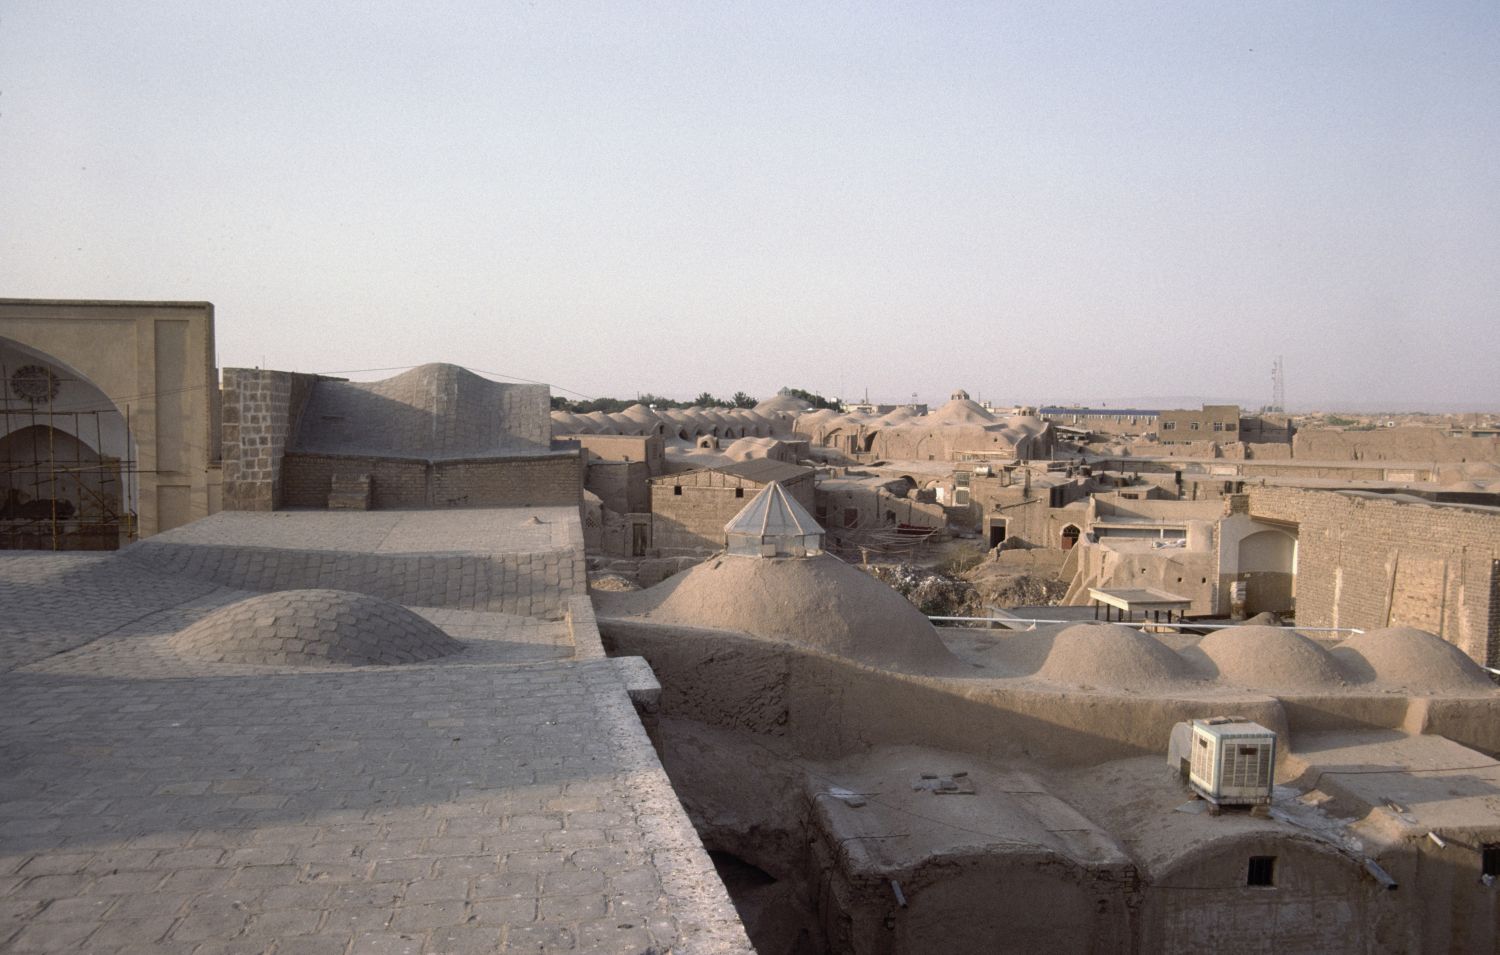 View from roof over the area surrounding the mosque. The domed roof of a covered bazaar street is visible in the background.